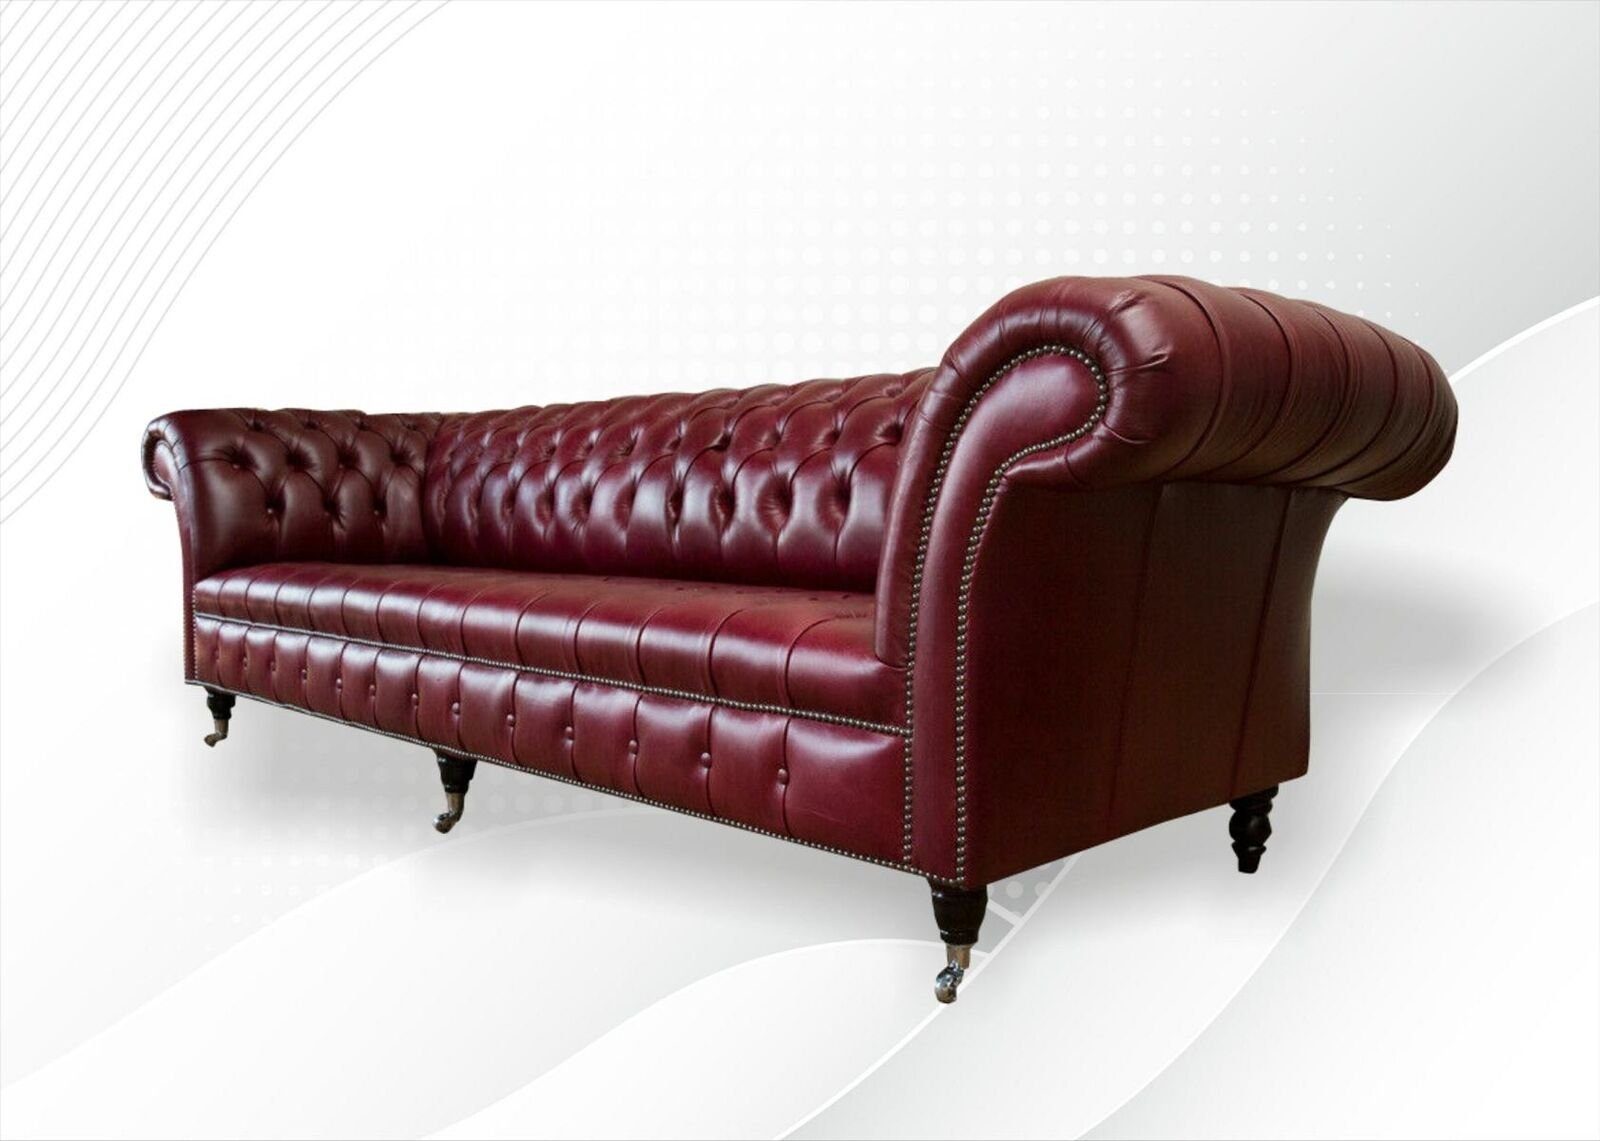 JVmoebel Chesterfield-Sofa Bordeaux Big Sofa Made in Sofort, 265cm Sofa Chesterfield 1 Teile, Couch 100% Leder Europa